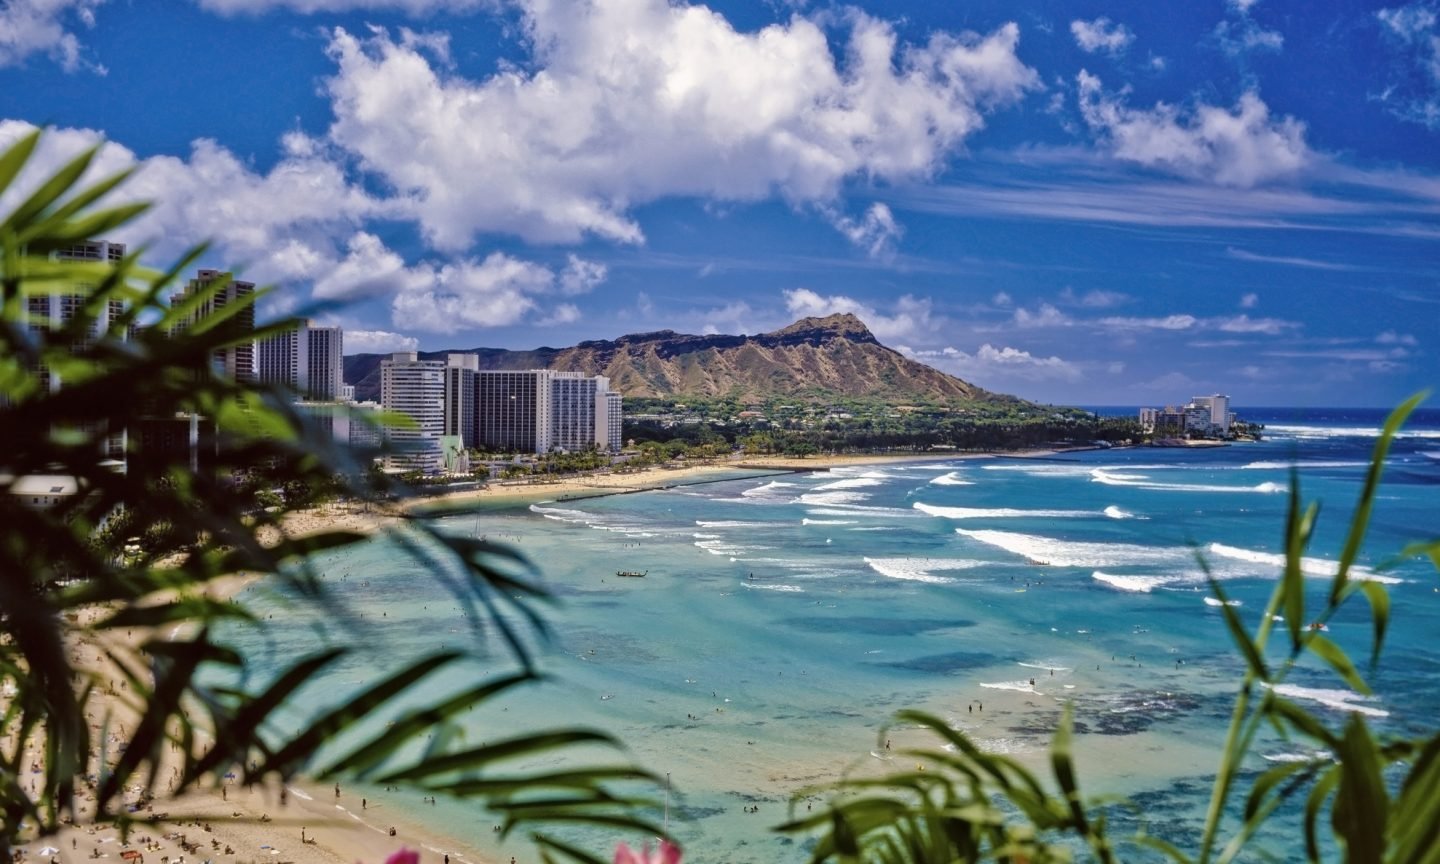 How to Travel to Honolulu on Points and Miles